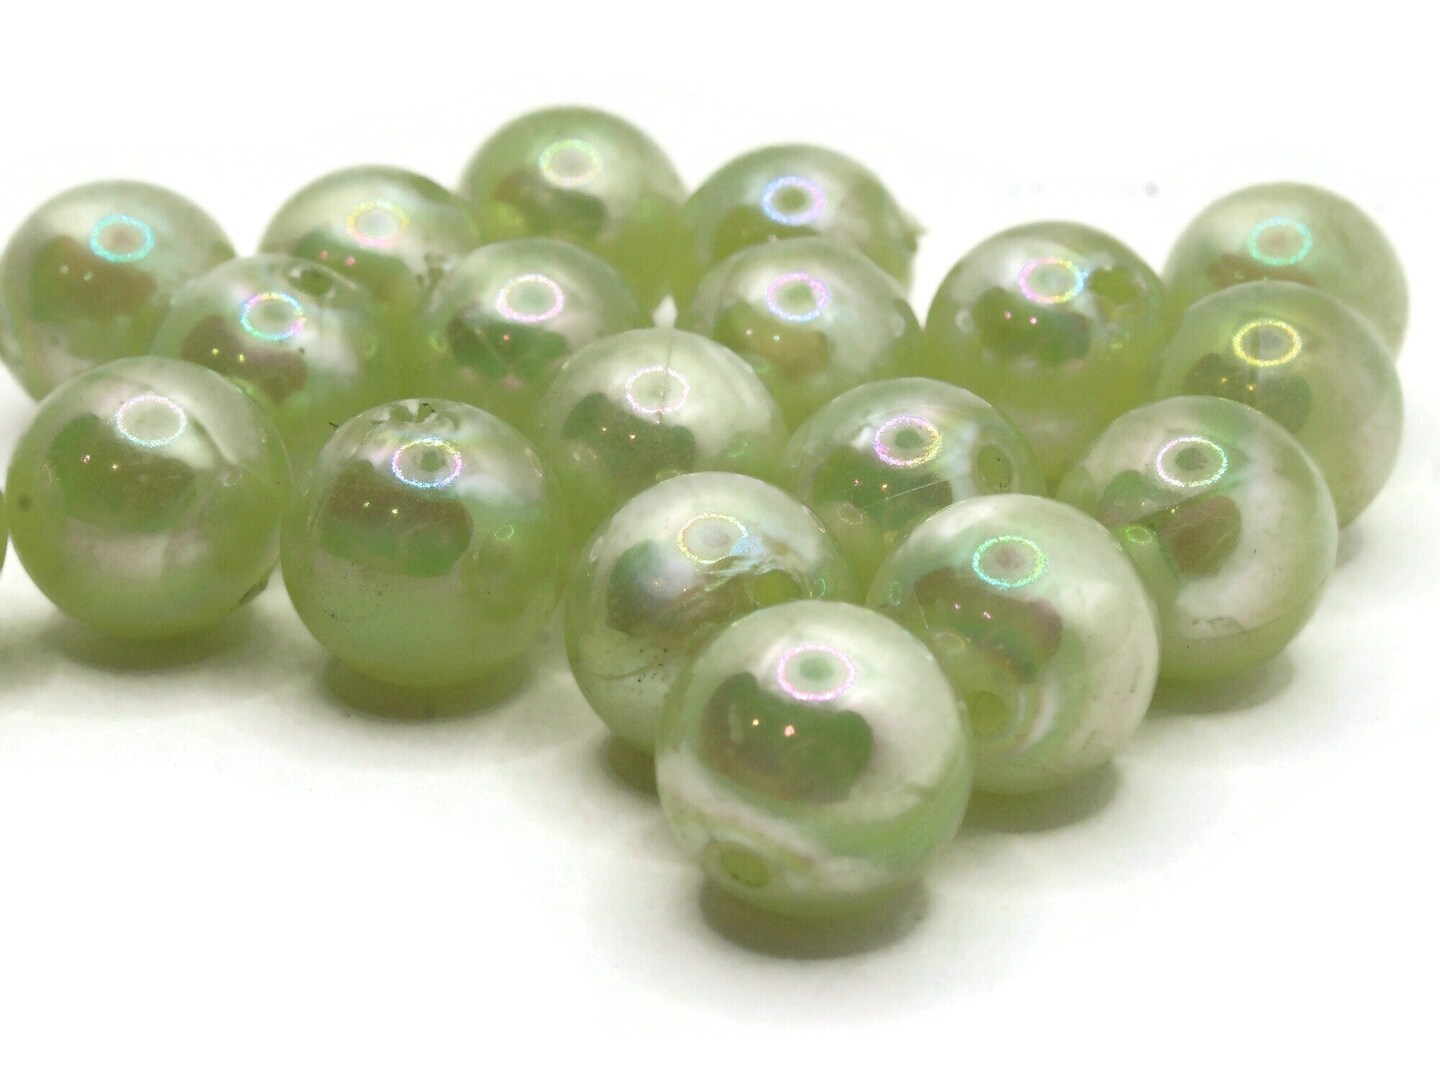 19 14mm Large Round Shiny Green Vintage Plastic Ball Beads